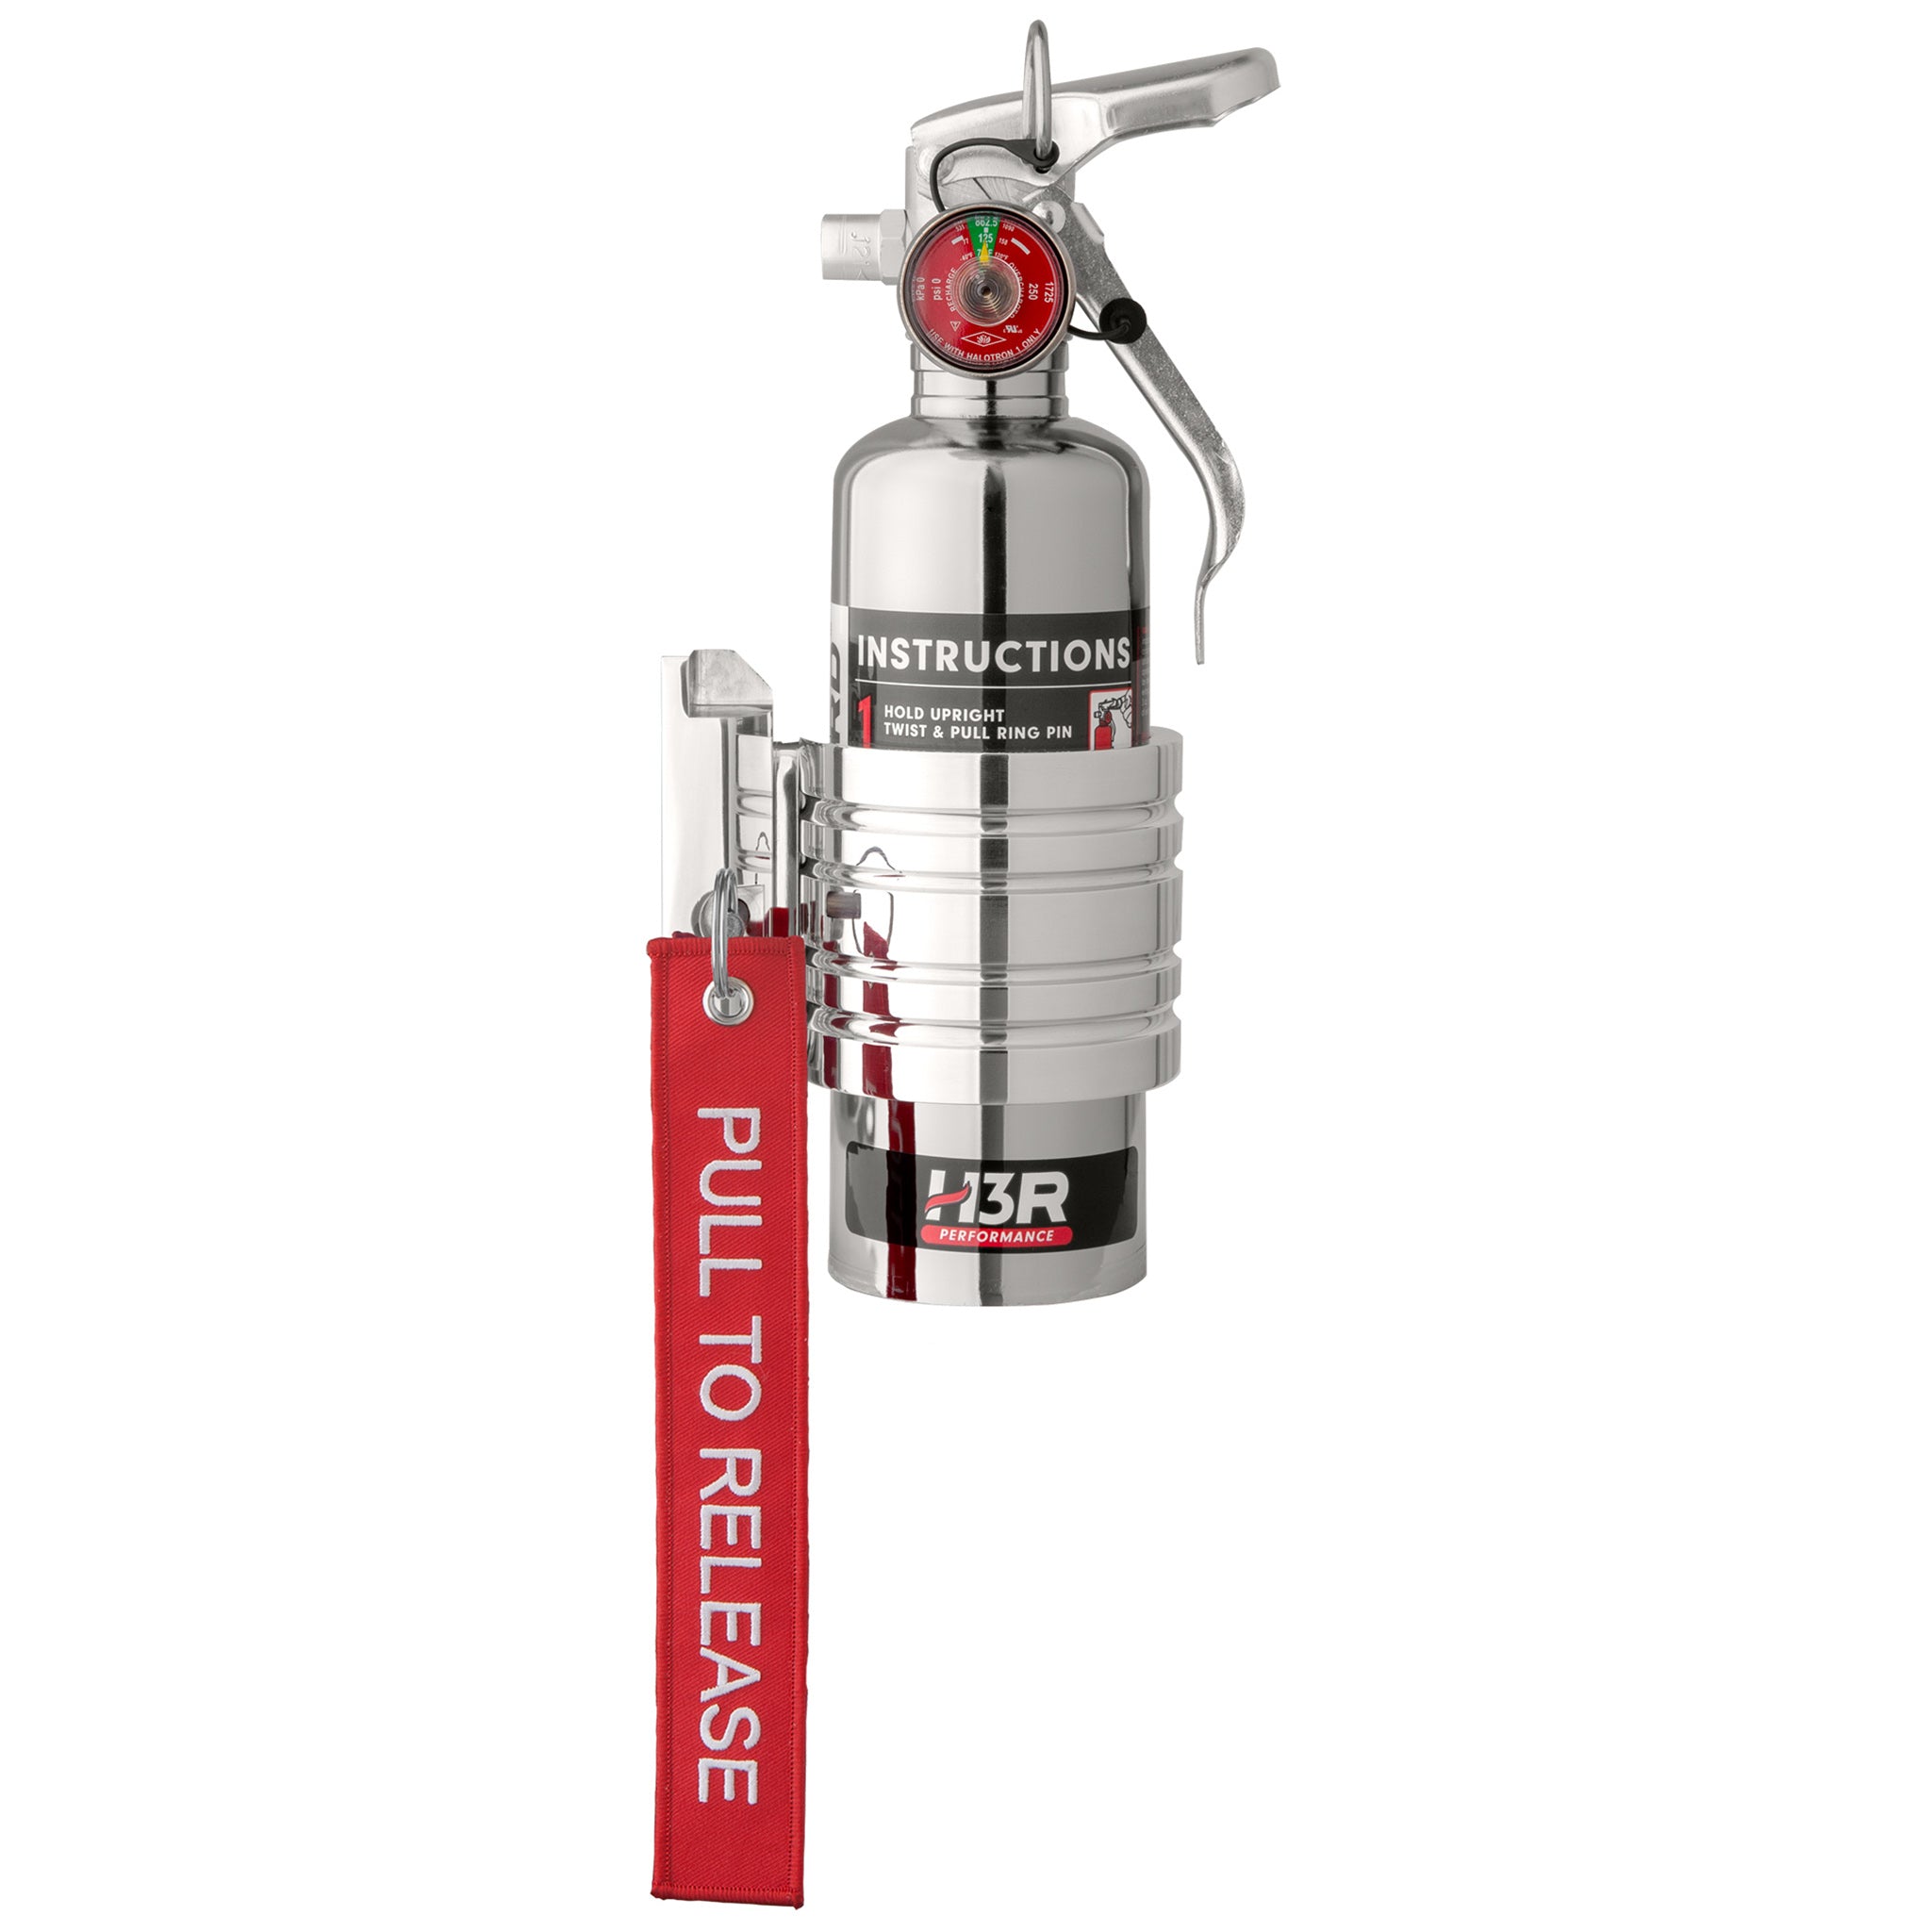 BB100P - Polished Finish Band Clamp for 1.0 & 1.4 lb. Extinguishers